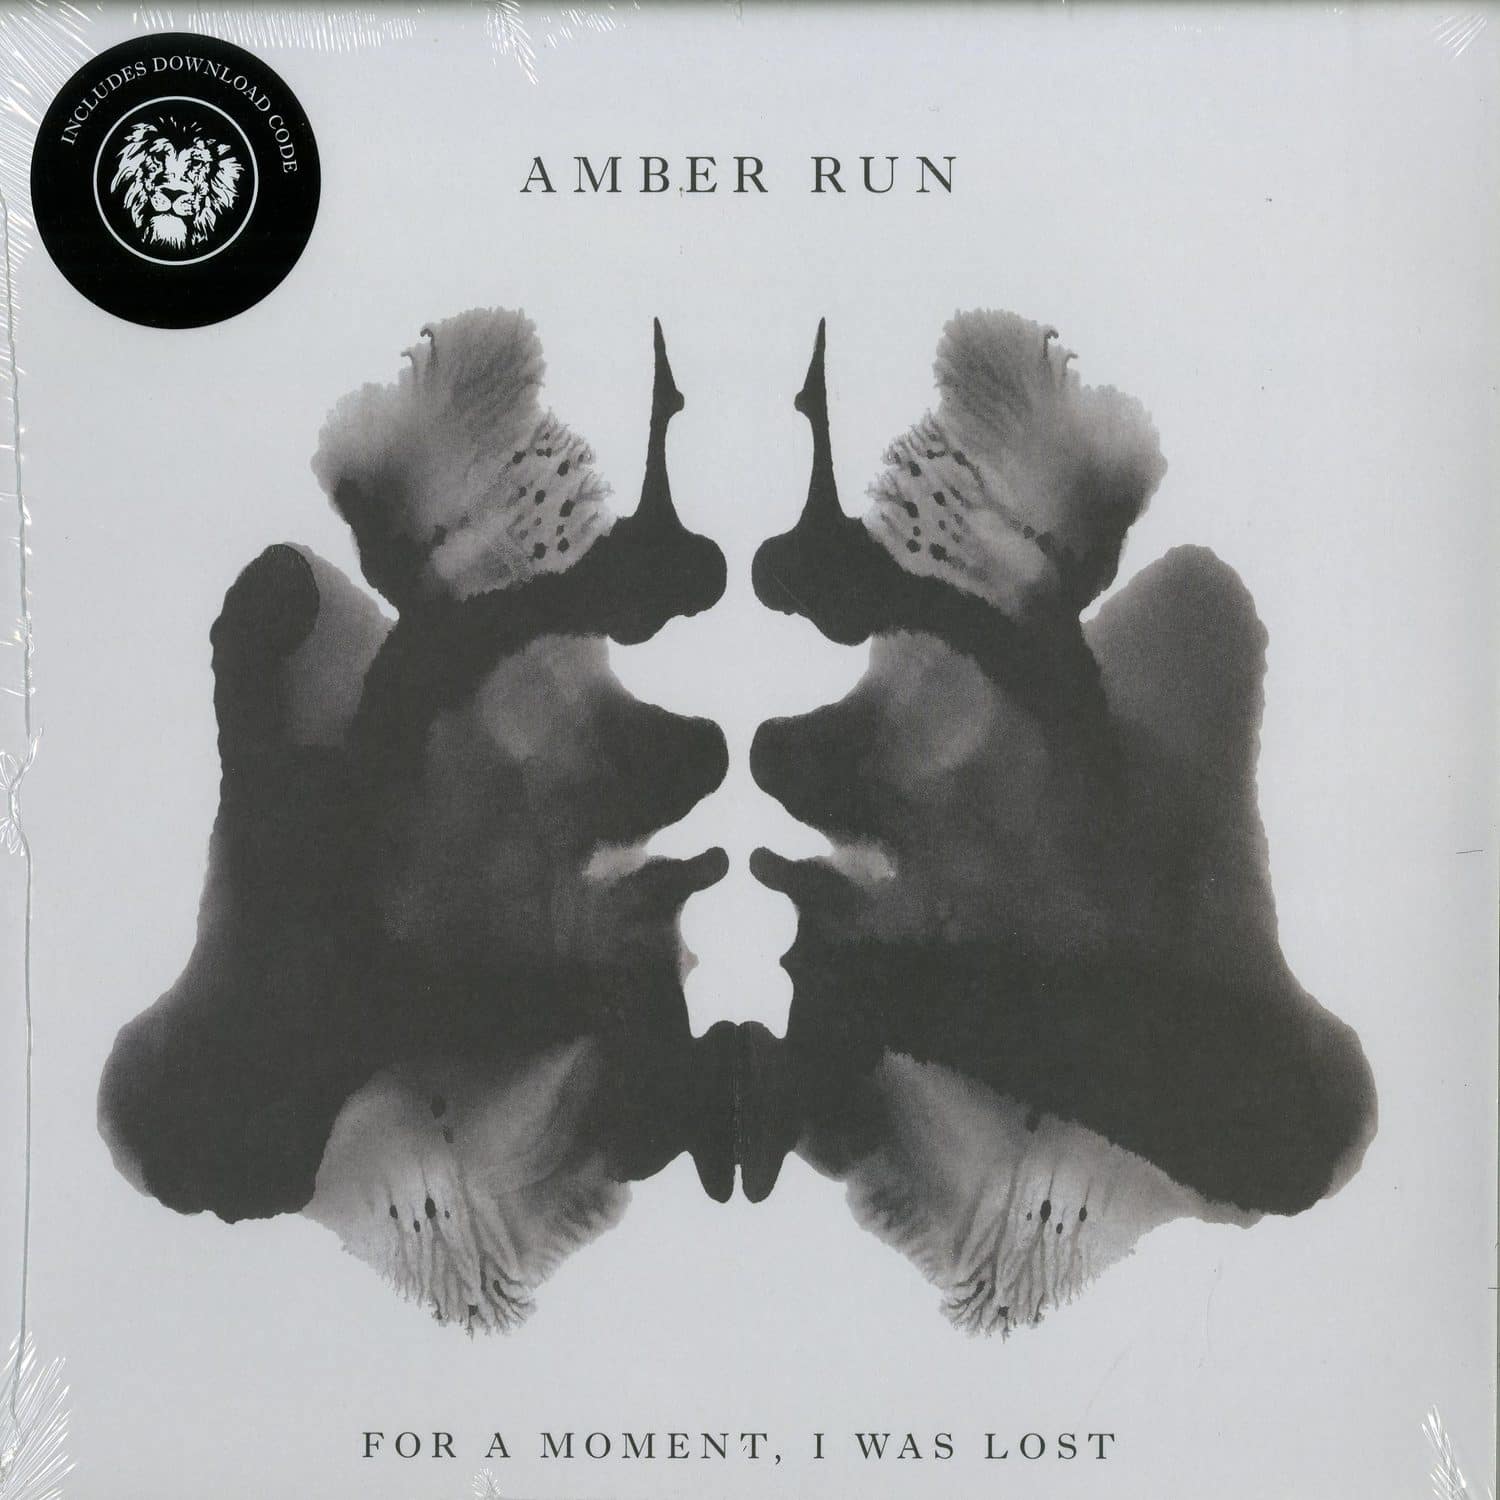 Amber Run - FOR A MOMENT, I WAS LOST 